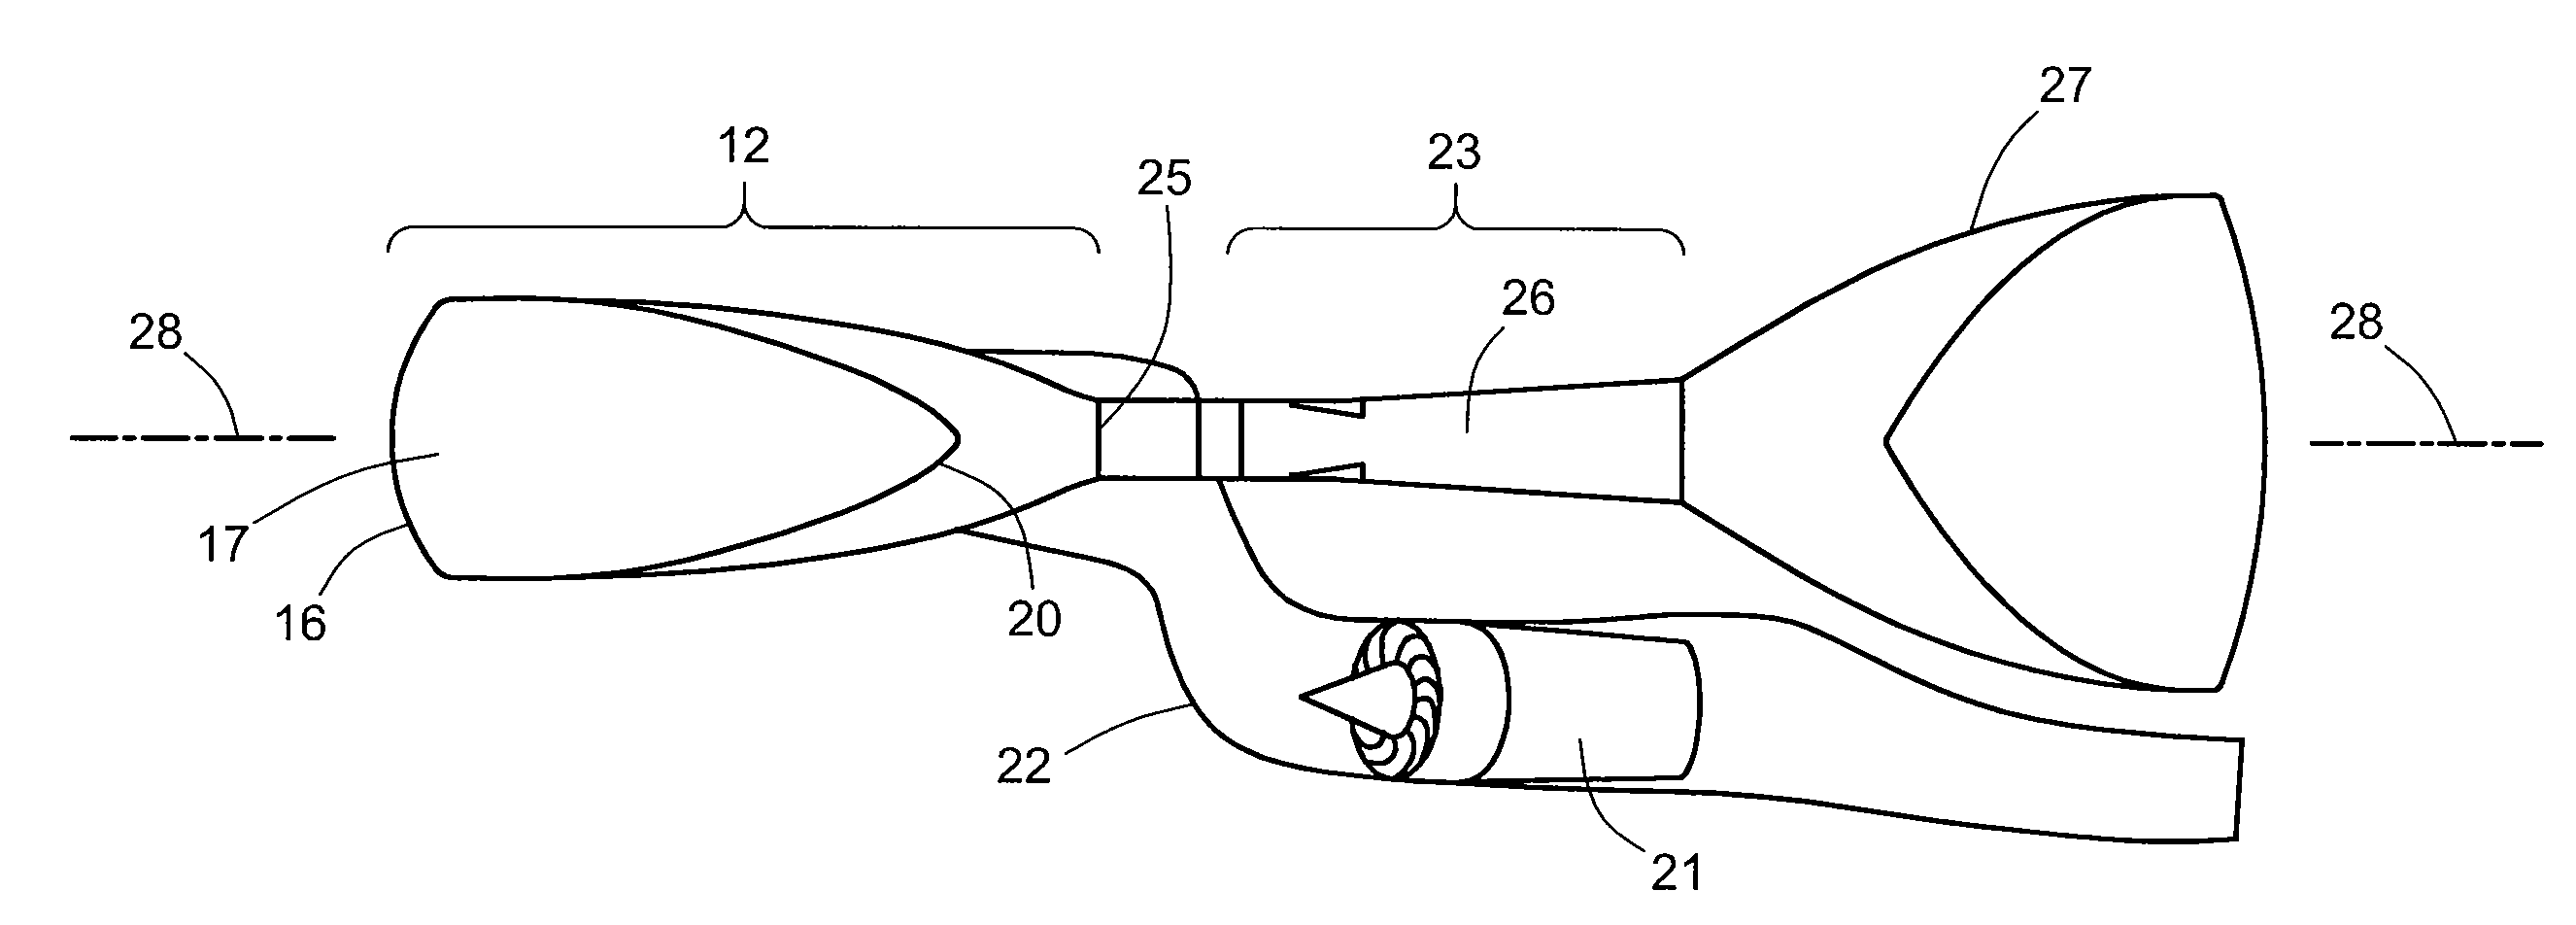 Integrated air inlet system for multi-propulsion aircraft engines